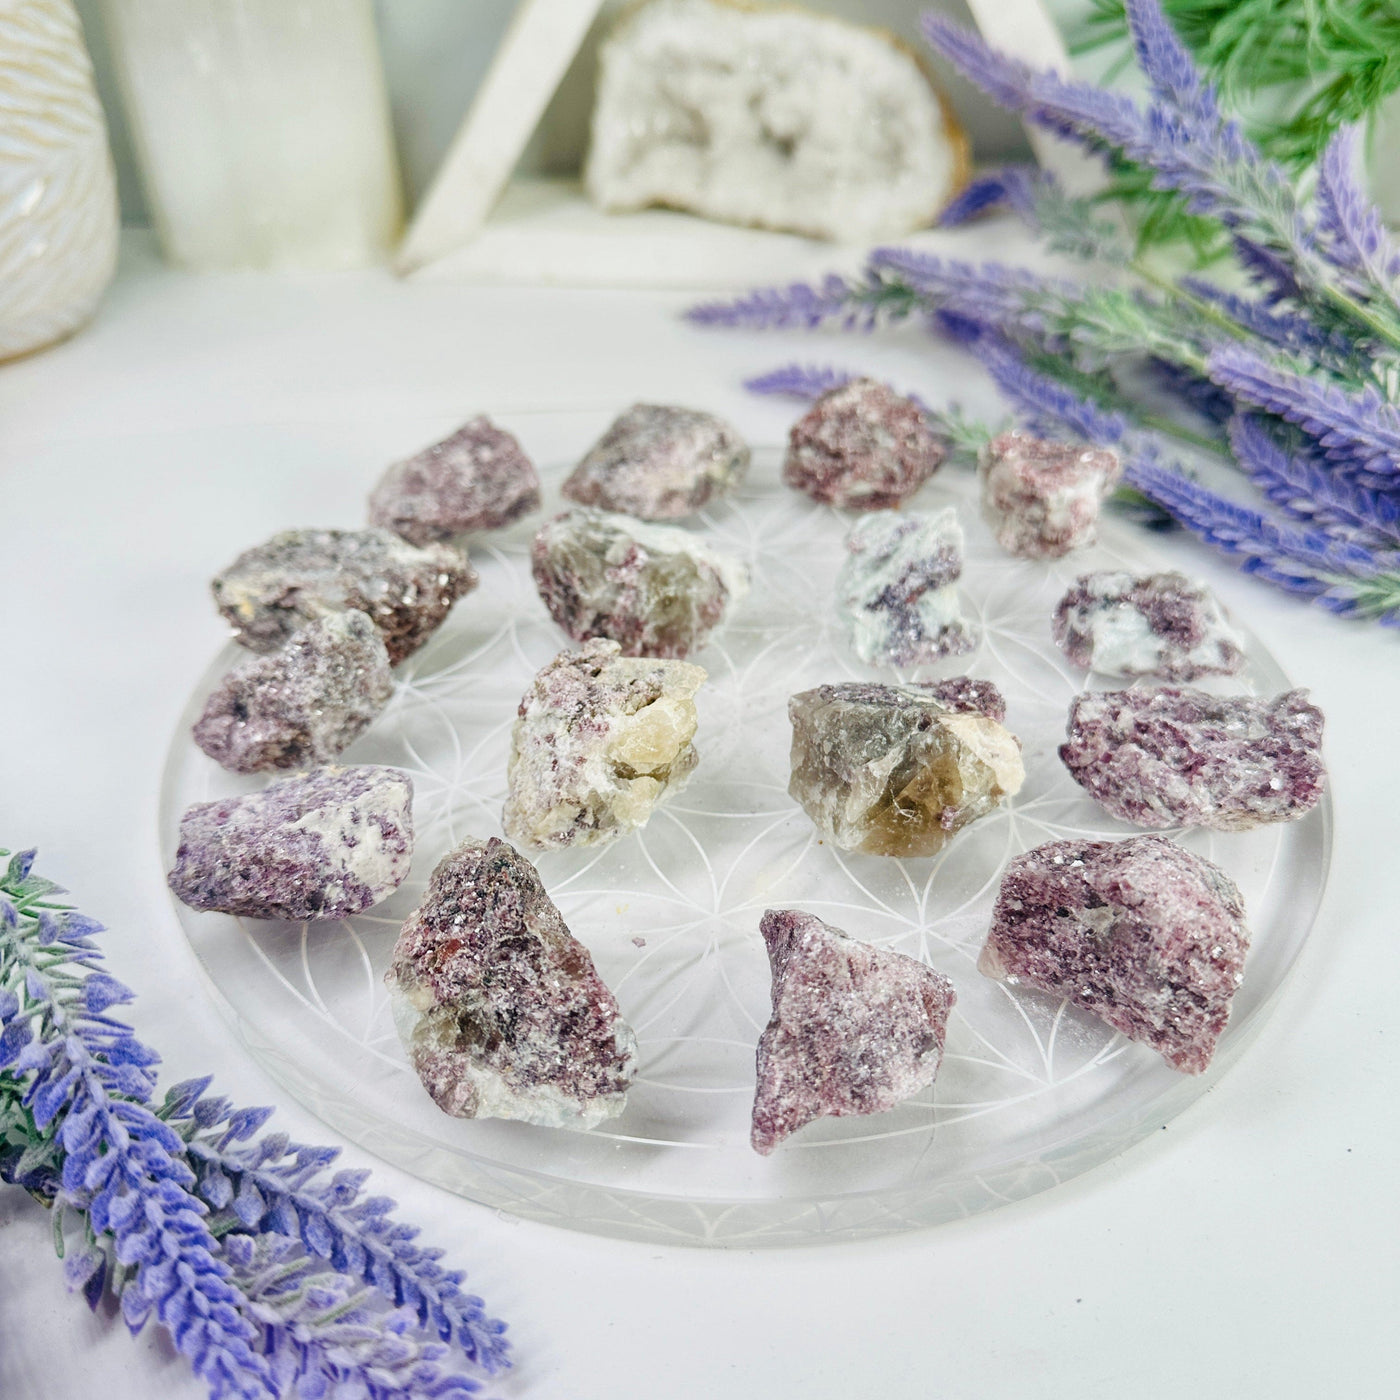 Lepidolite Chunks - Rough Stone - Natural Crystal - You Get All arranged on flower of life dish